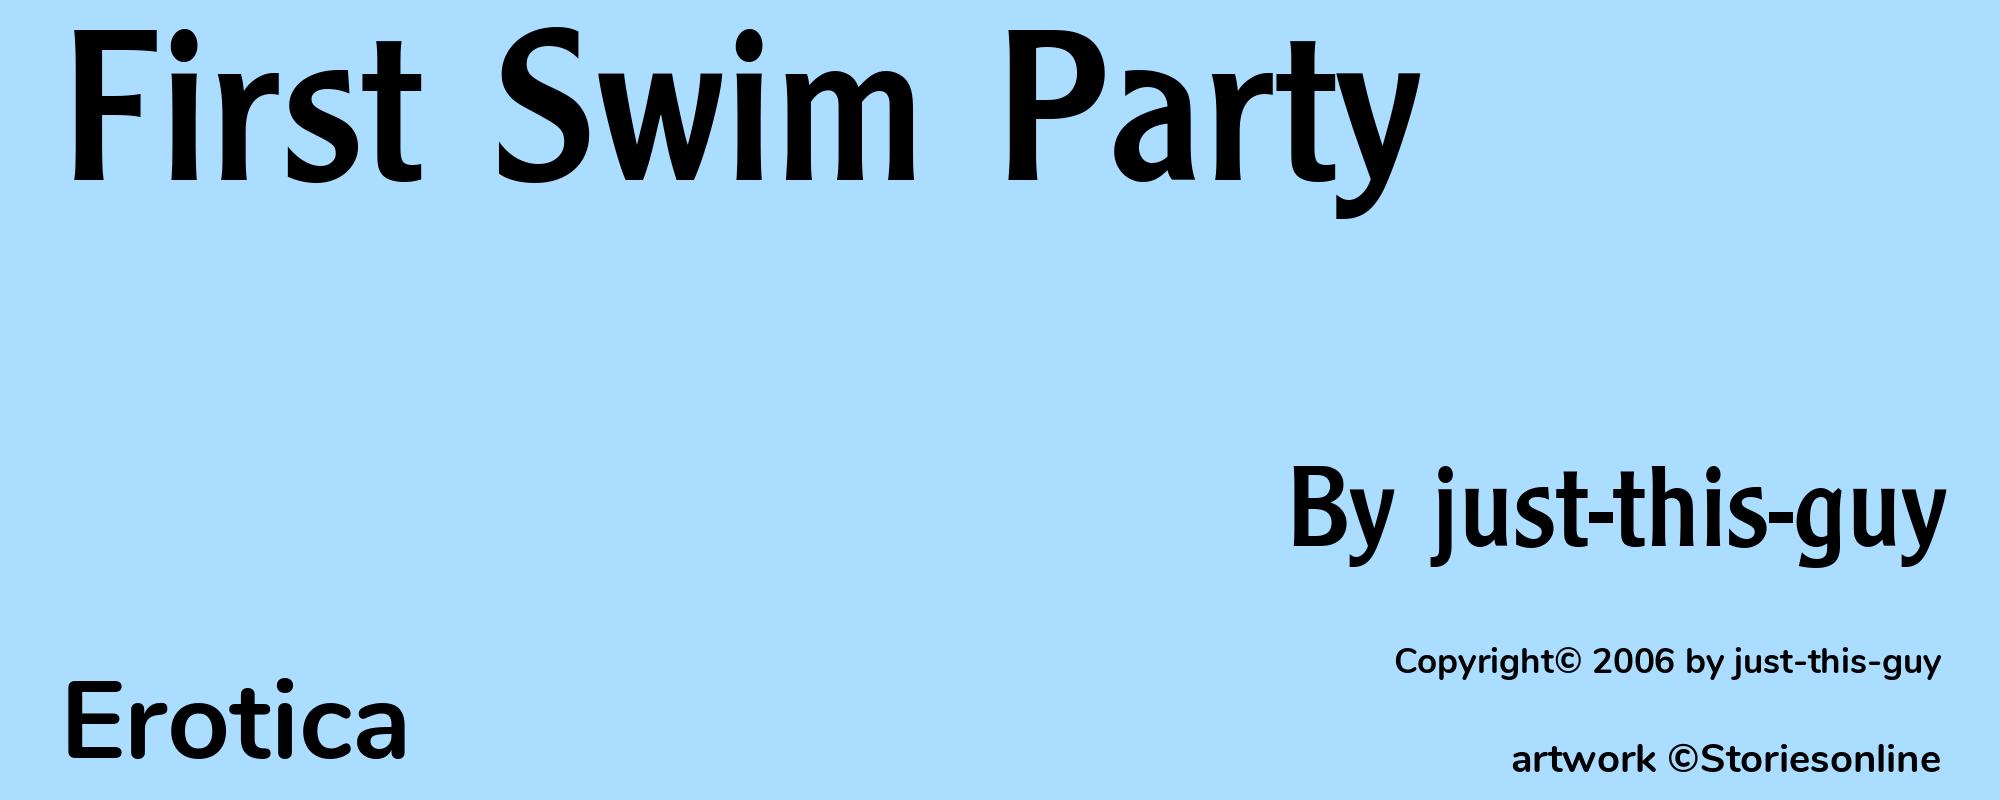 First Swim Party - Cover